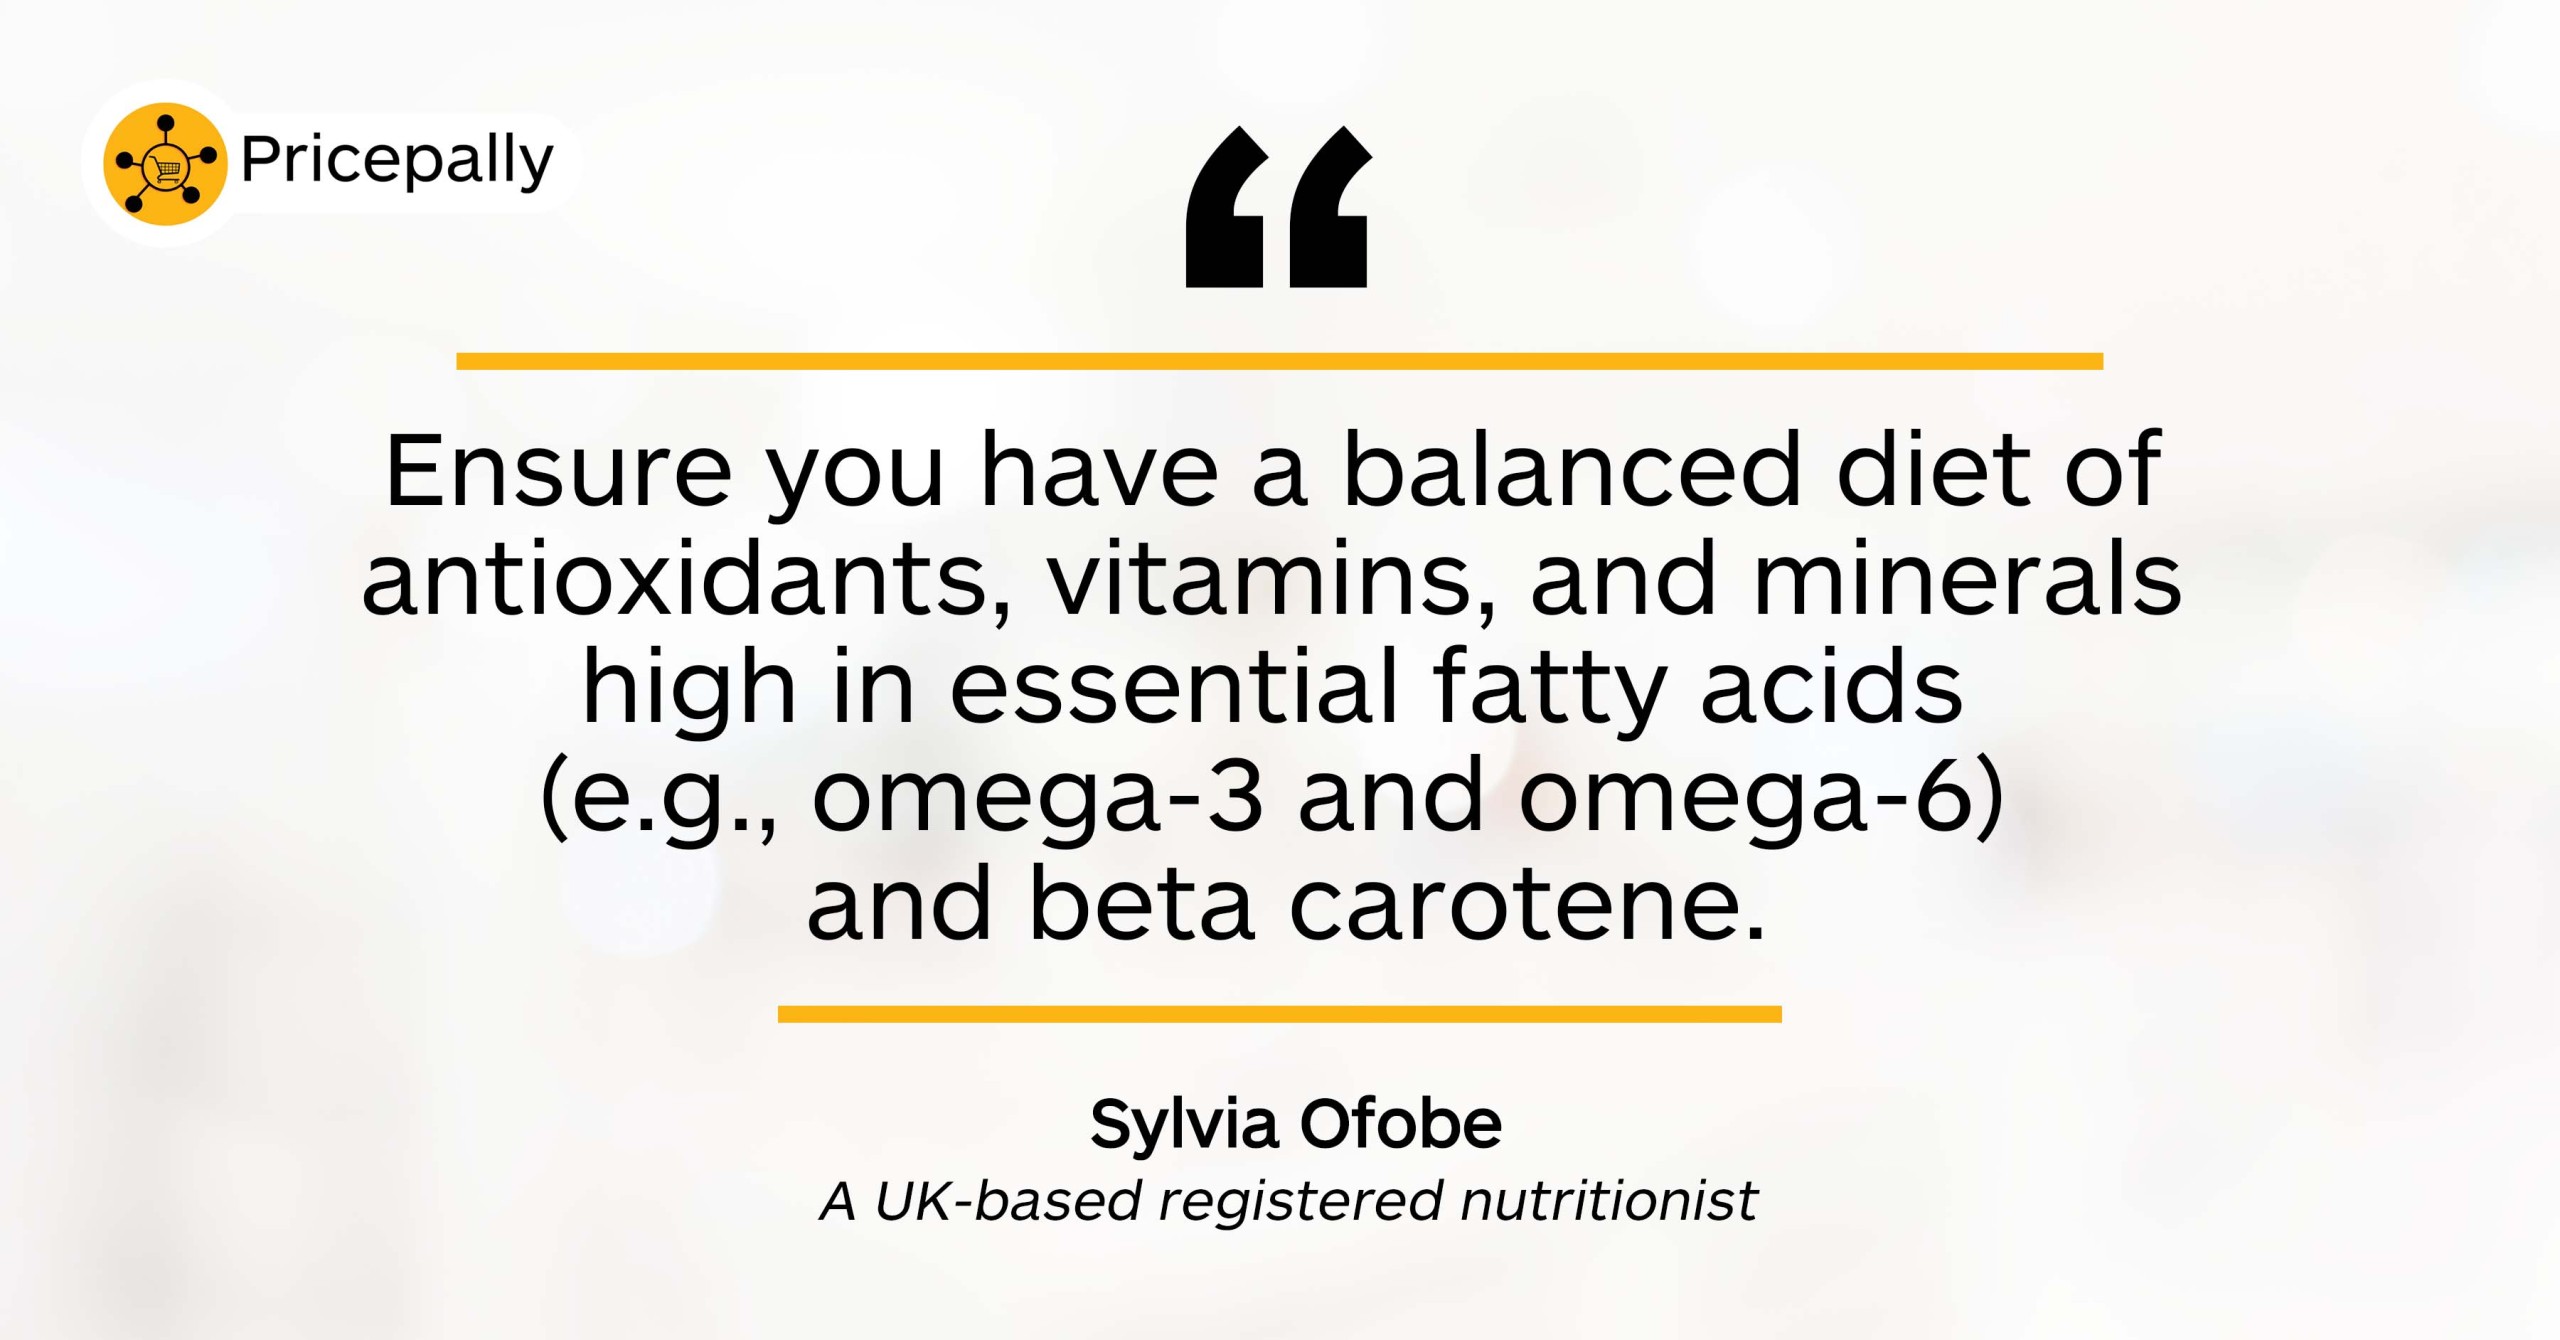 Sylvia Ofobe's explains the right diet for clear skin